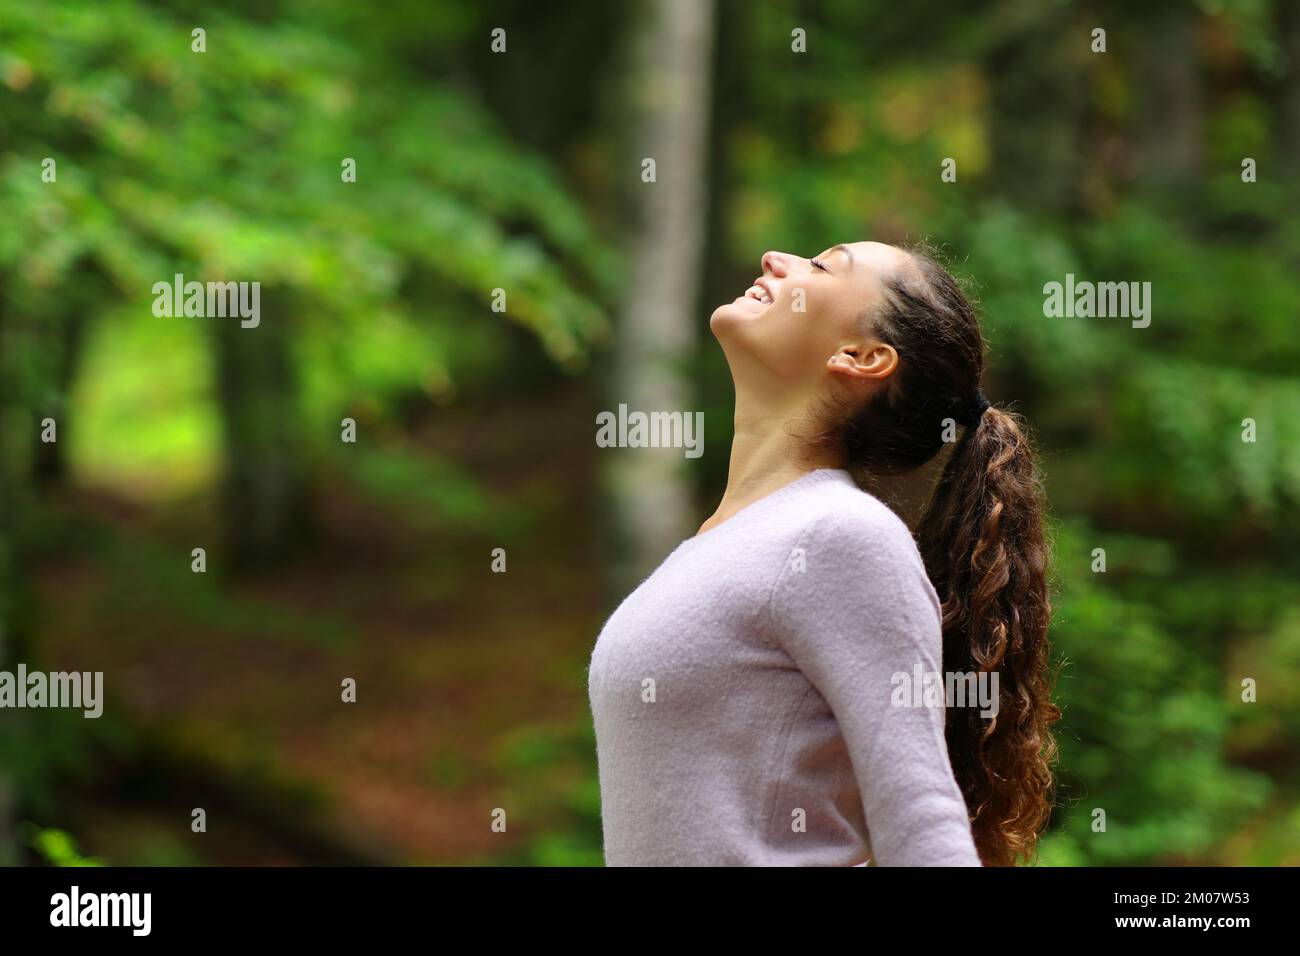 Profile of a happy woman in a forest breathing fresh air Stock Photo